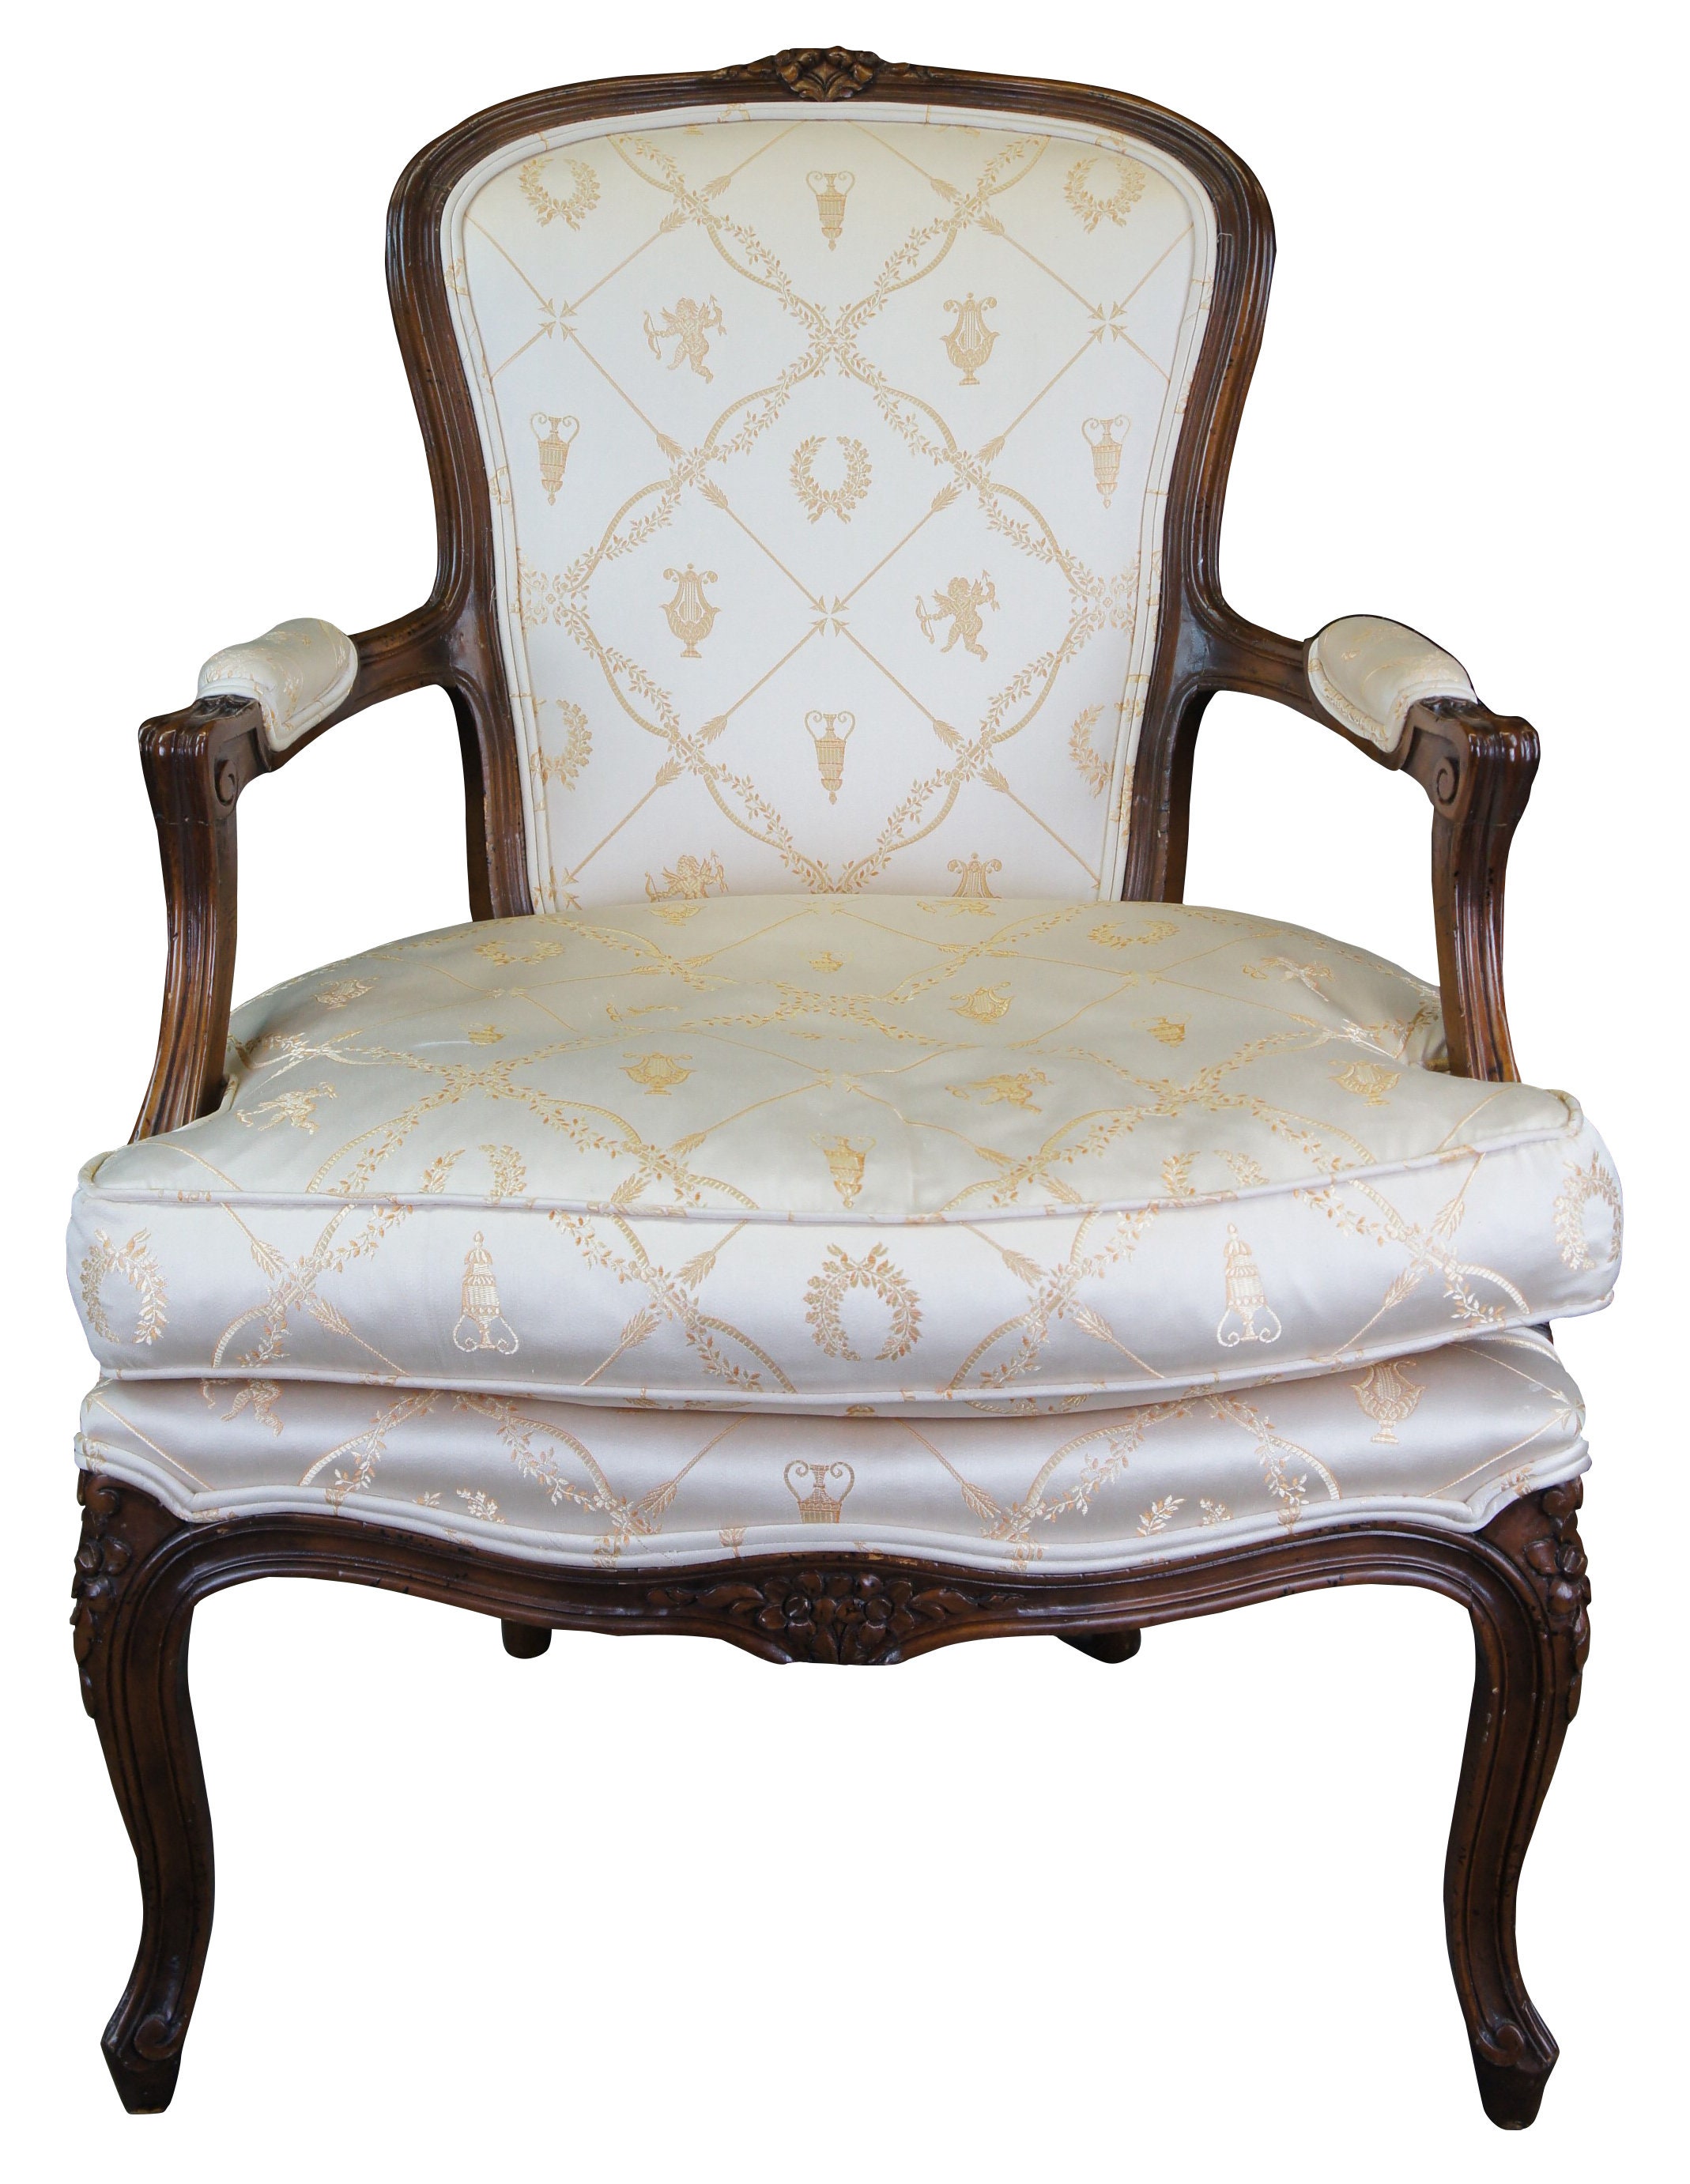 Louis XV Style Pair of Chairs – English Country Home